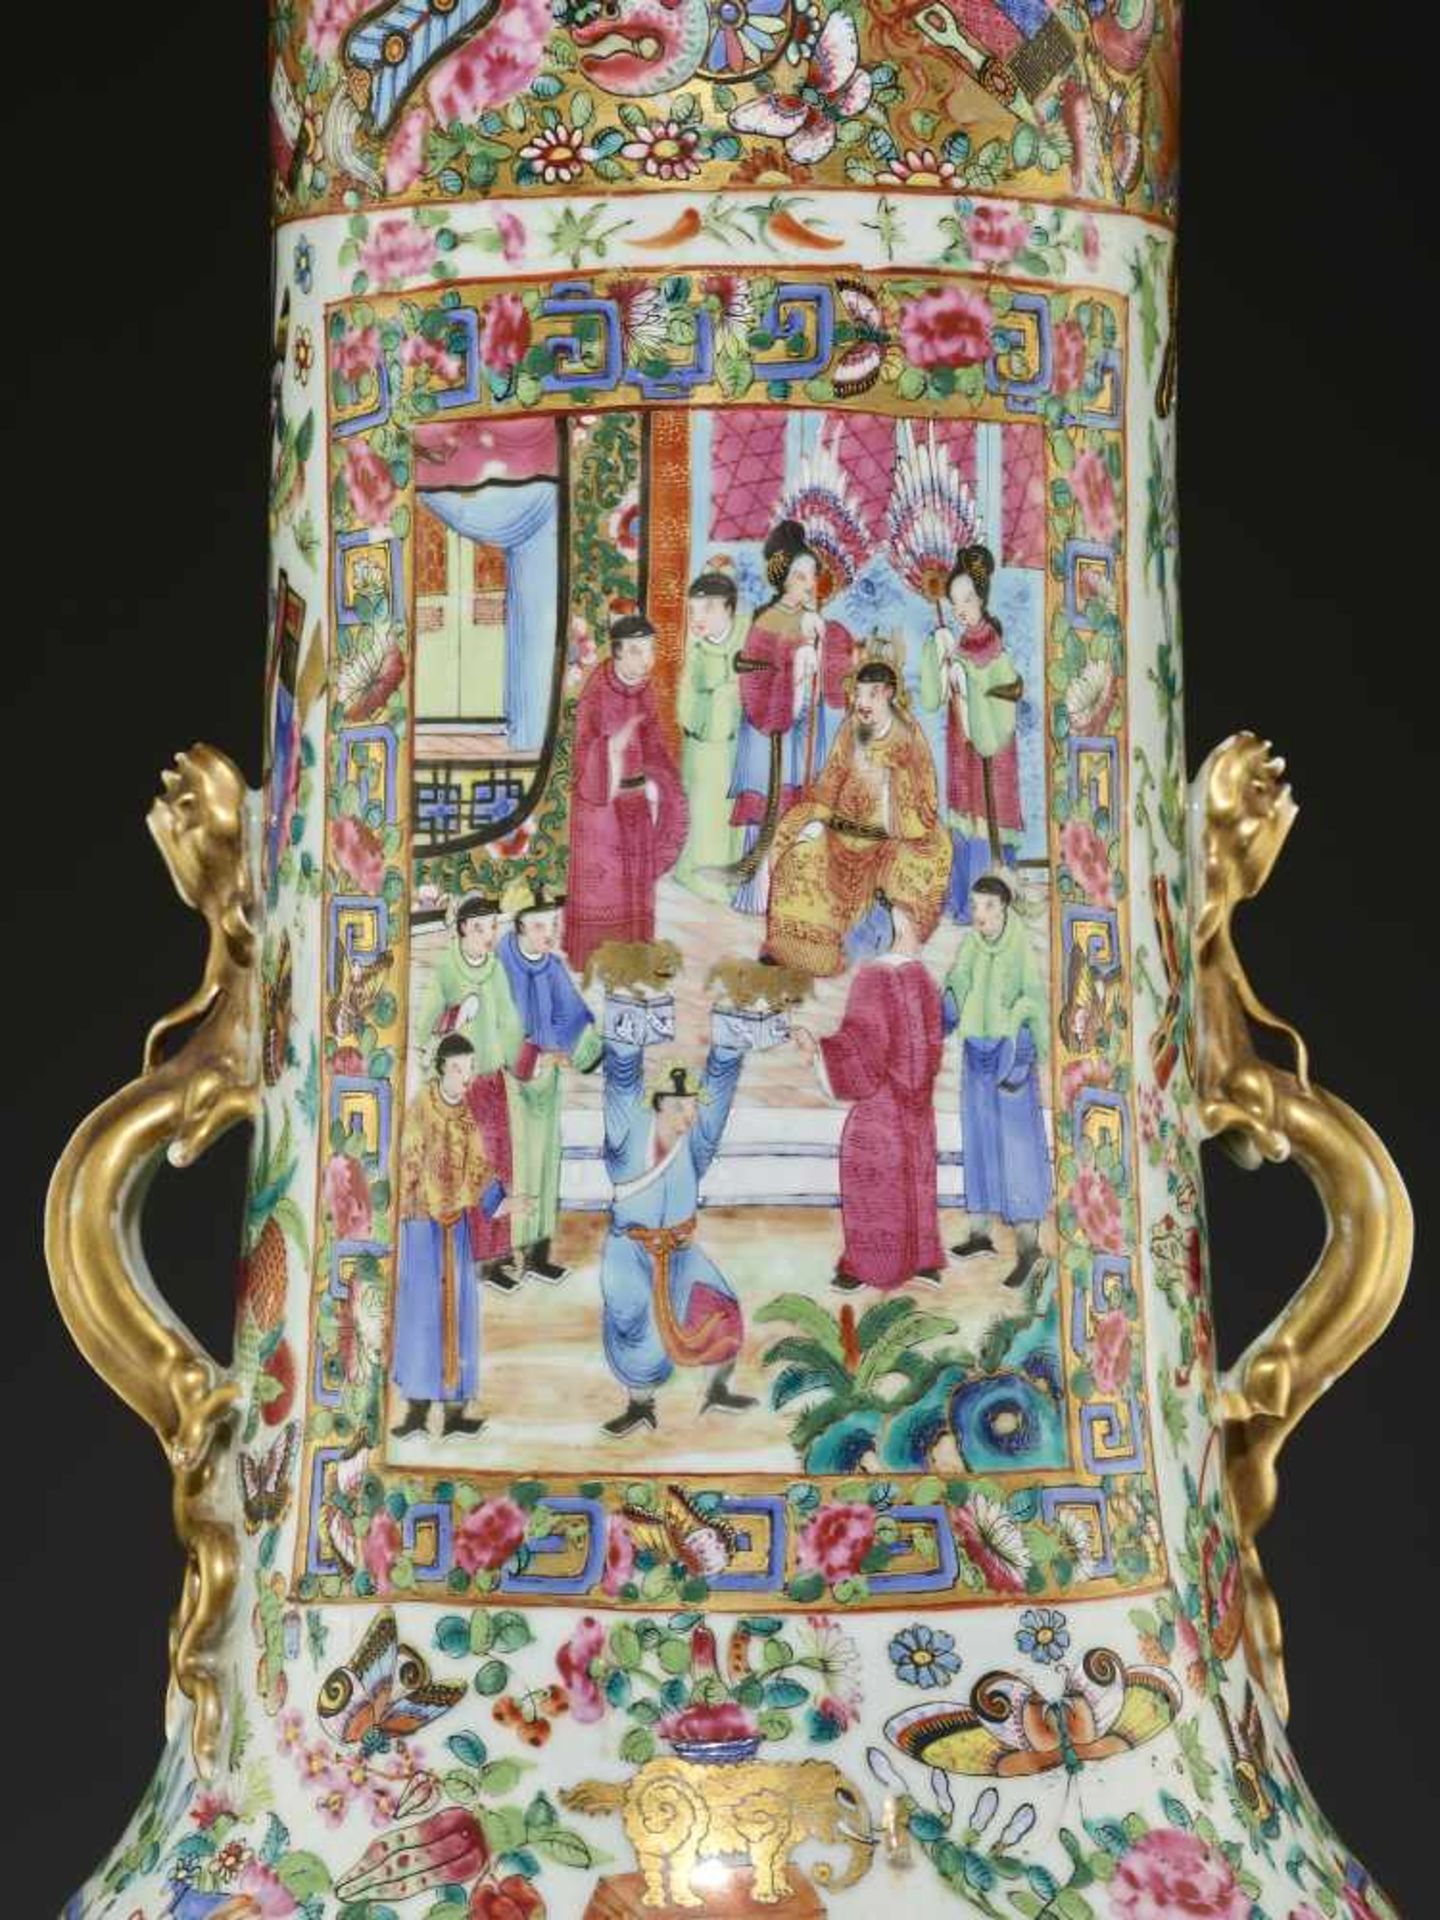 TWO LARGE WATER MARGIN VASES, 1850sChina, mid-19th century. Painted in bright enamels from the - Image 18 of 21